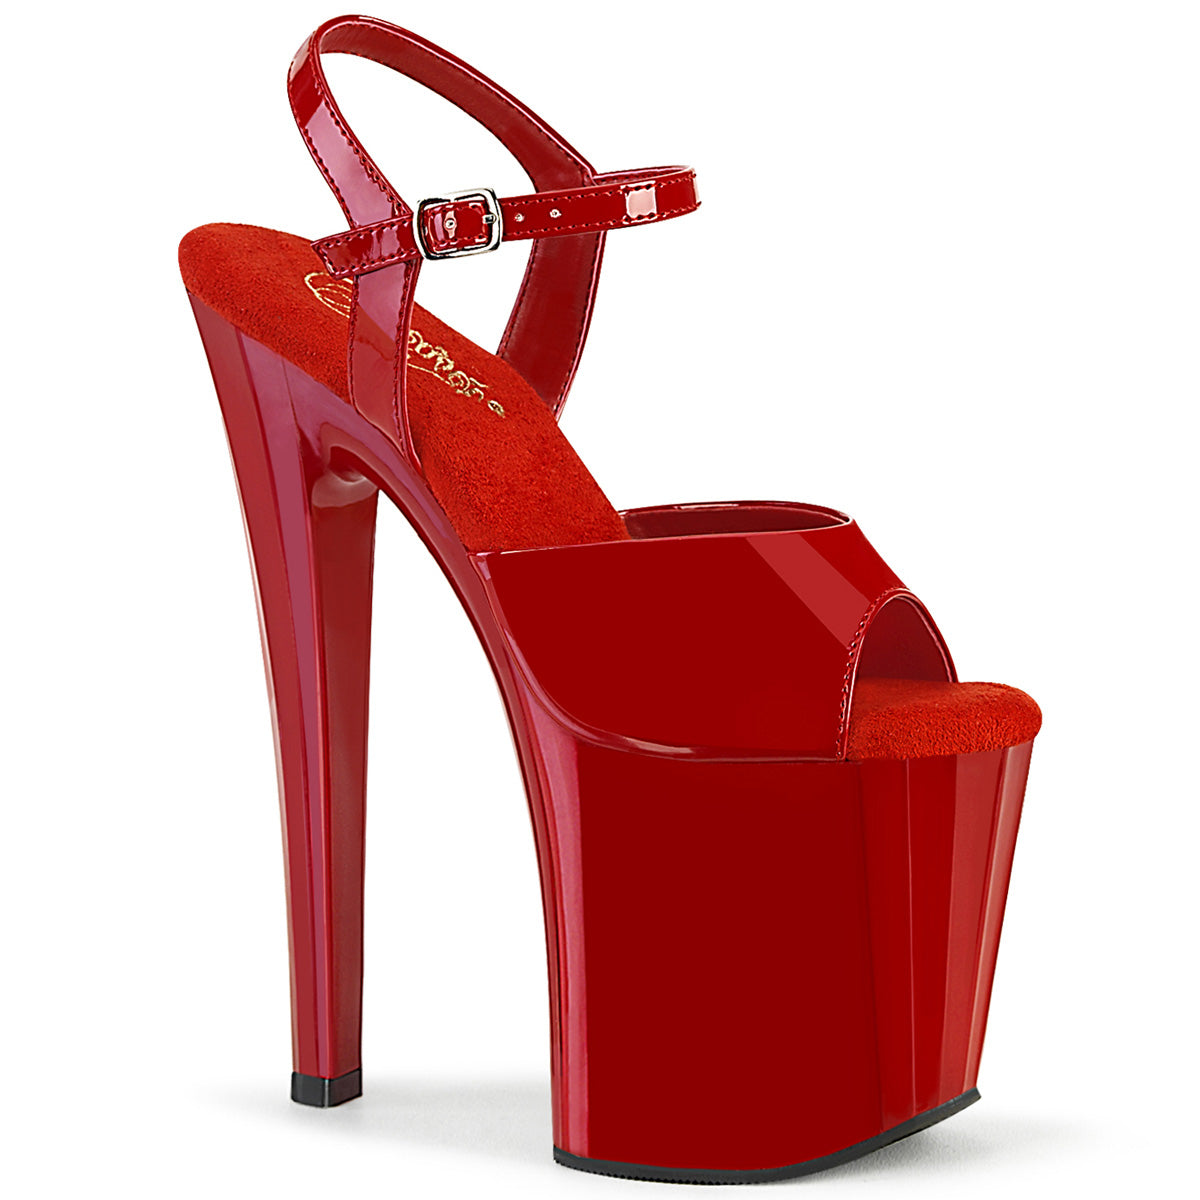 ENCHANT-709 Red Patent/Red